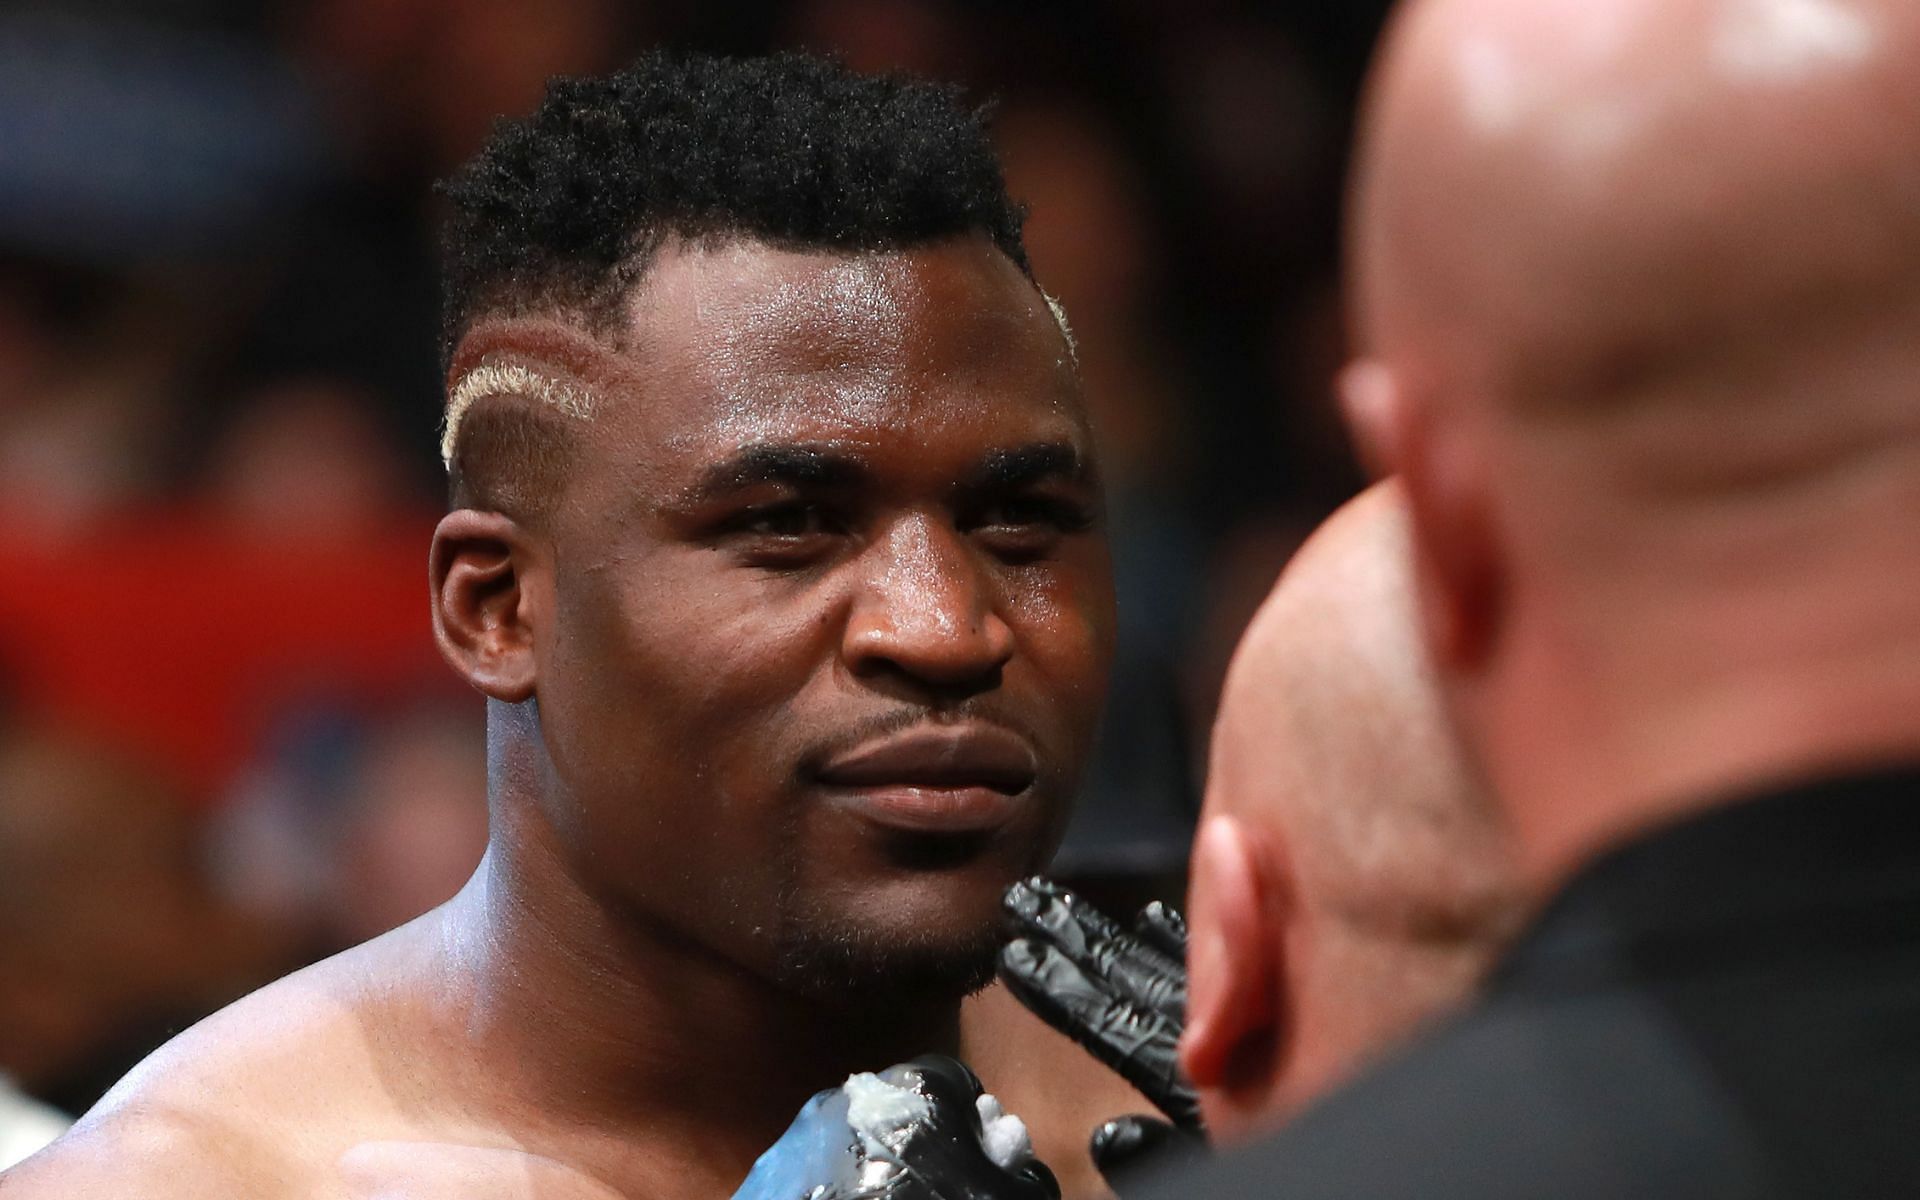 Francis Ngannou gears up for his first encounter against Stipe Miocic at UFC 220 in January 2018